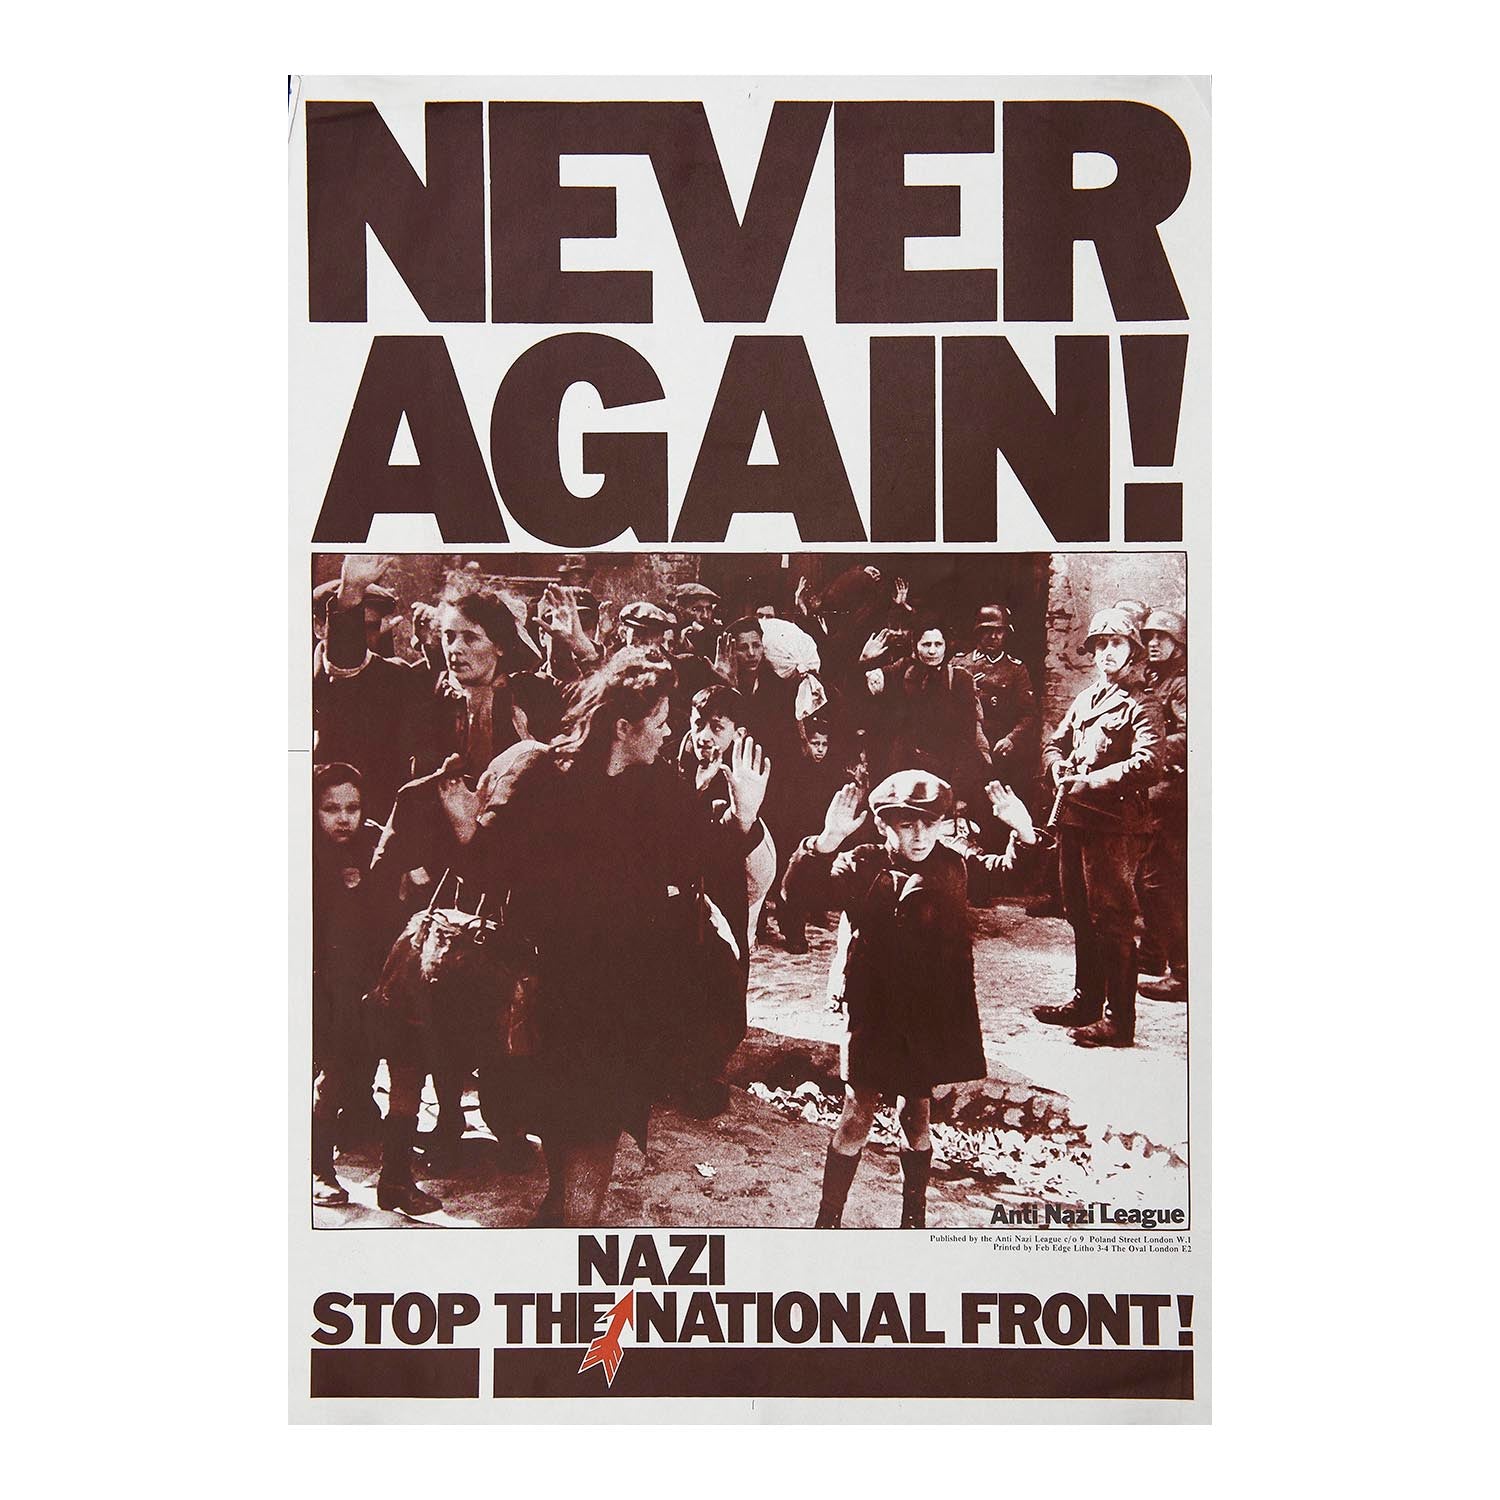 Original Anti-Nazi League designed by David King, 1978. Photograph of the Warsaw Ghetto under the slogan Never Again. Stop the Nazi National Front.